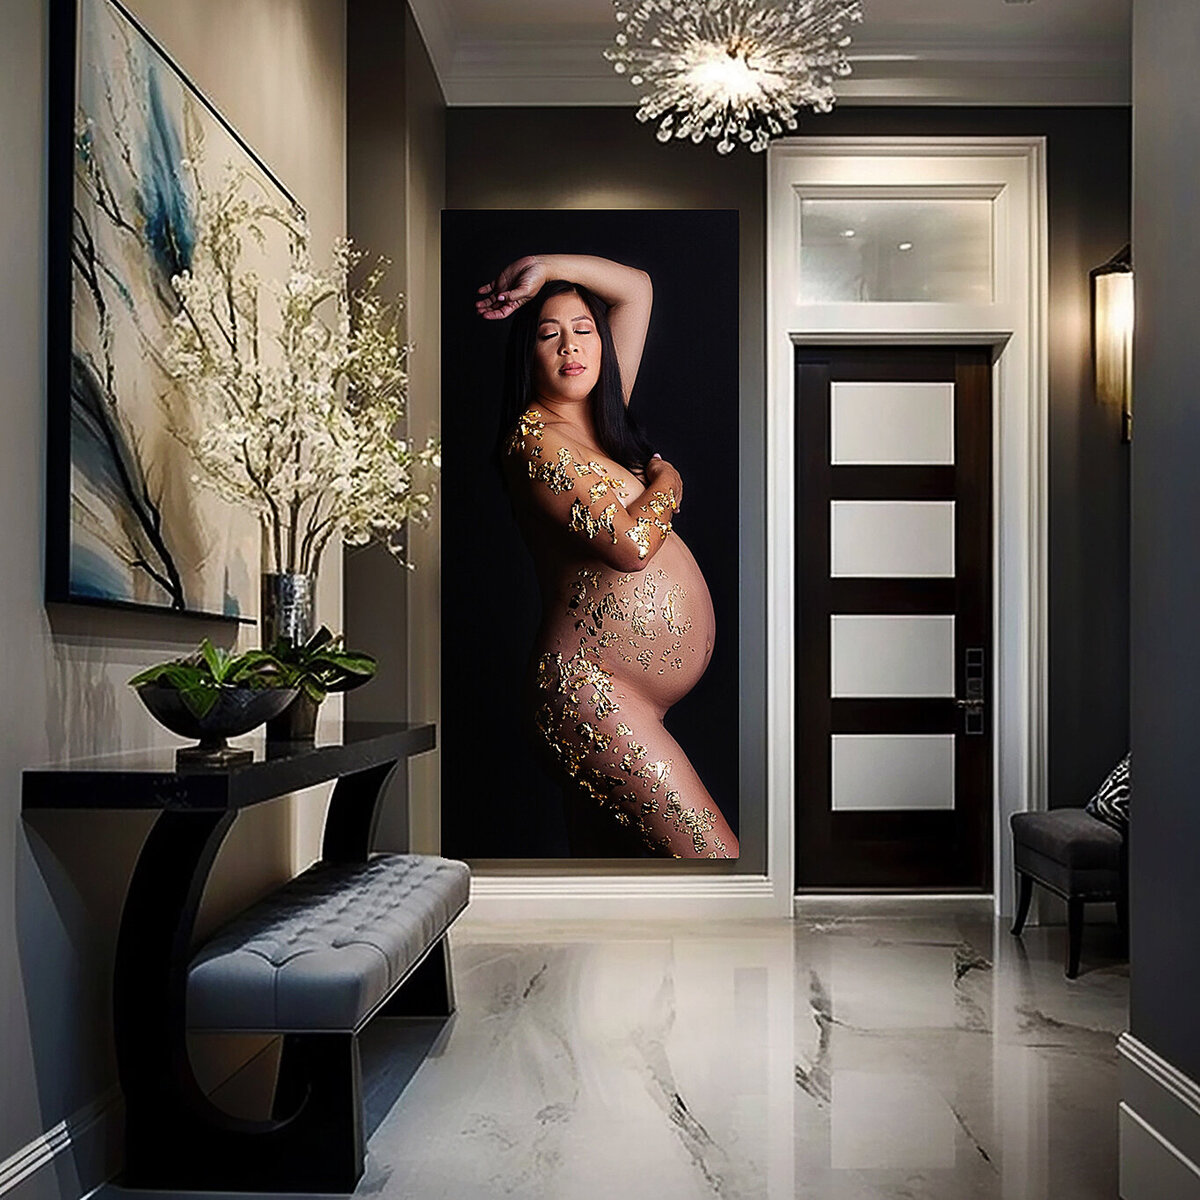 Maternity photoshoot at blueberry and lace photography modern wall art